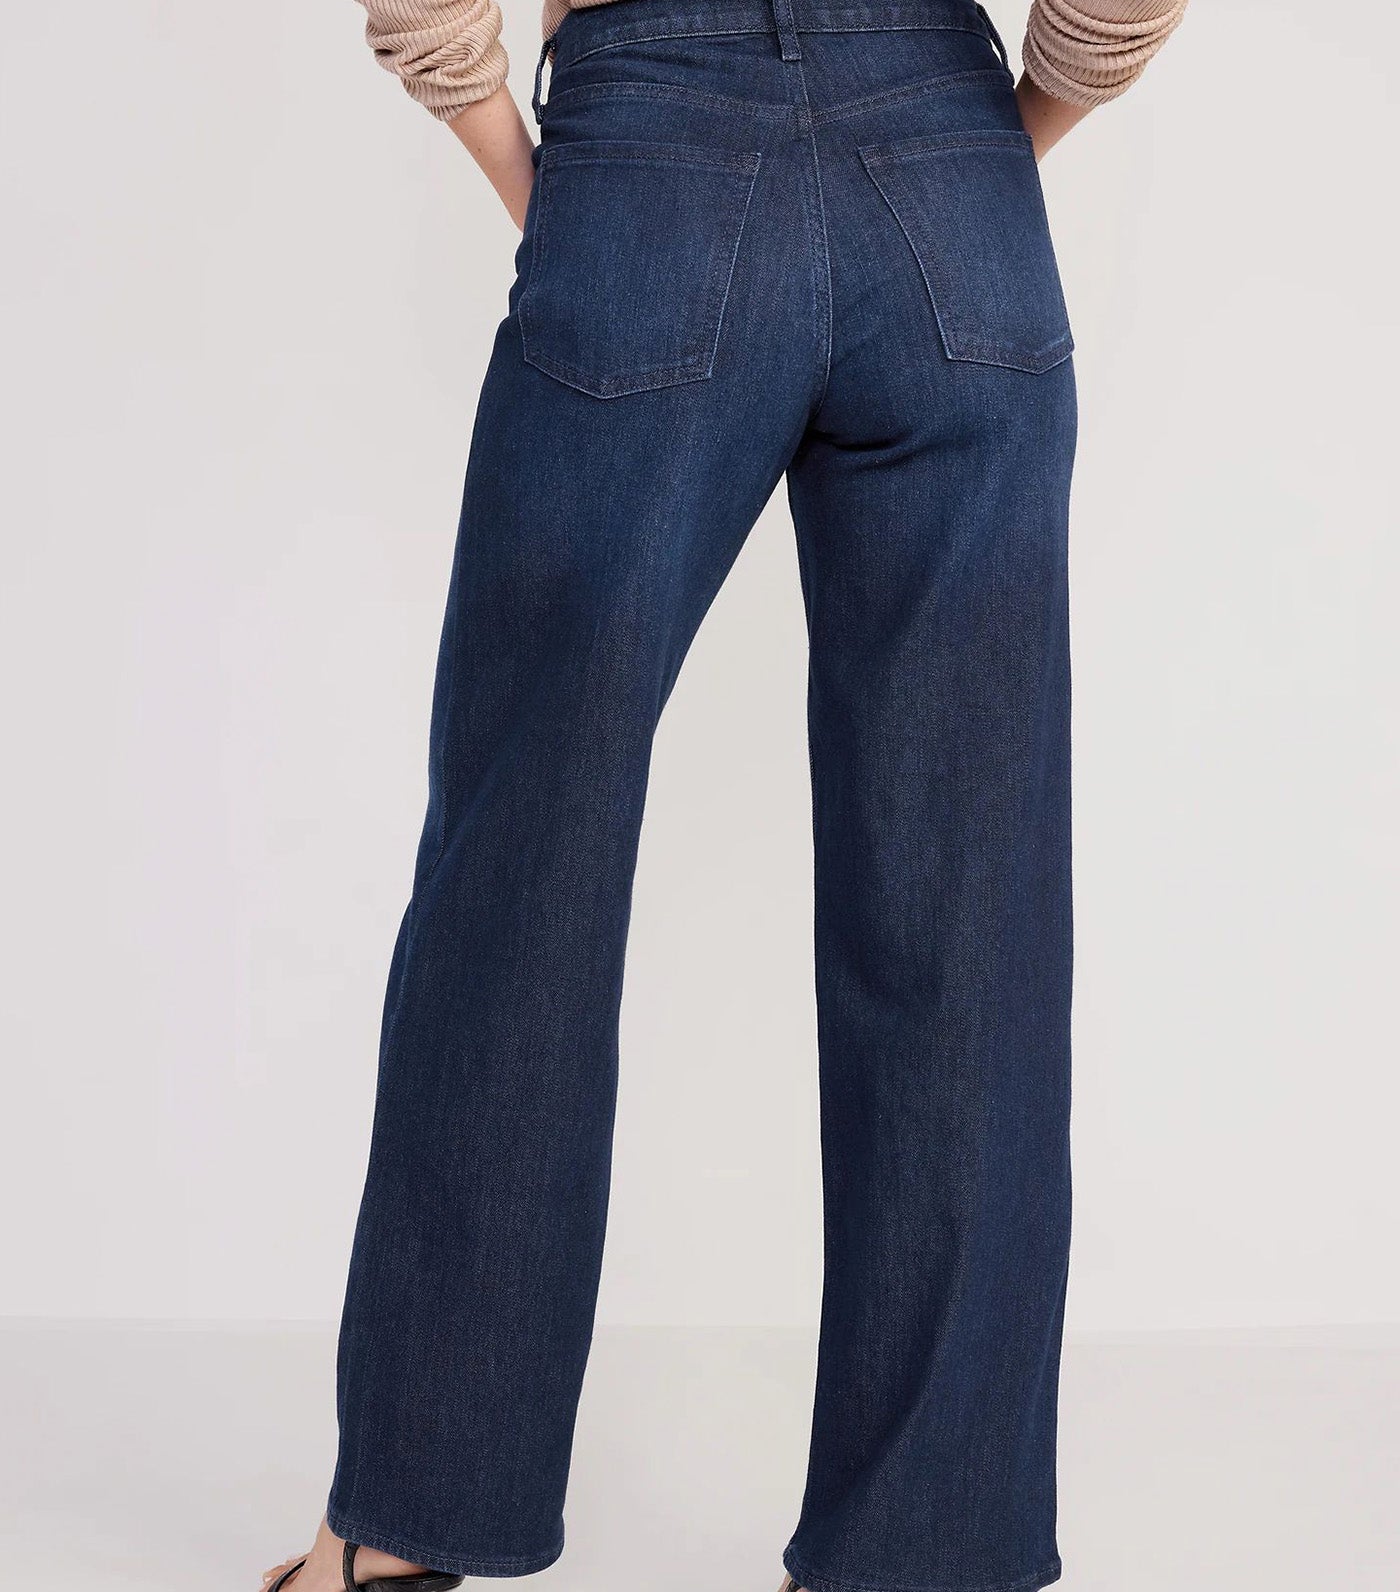 High-Waisted Wow Wide-Leg Jeans for Women River